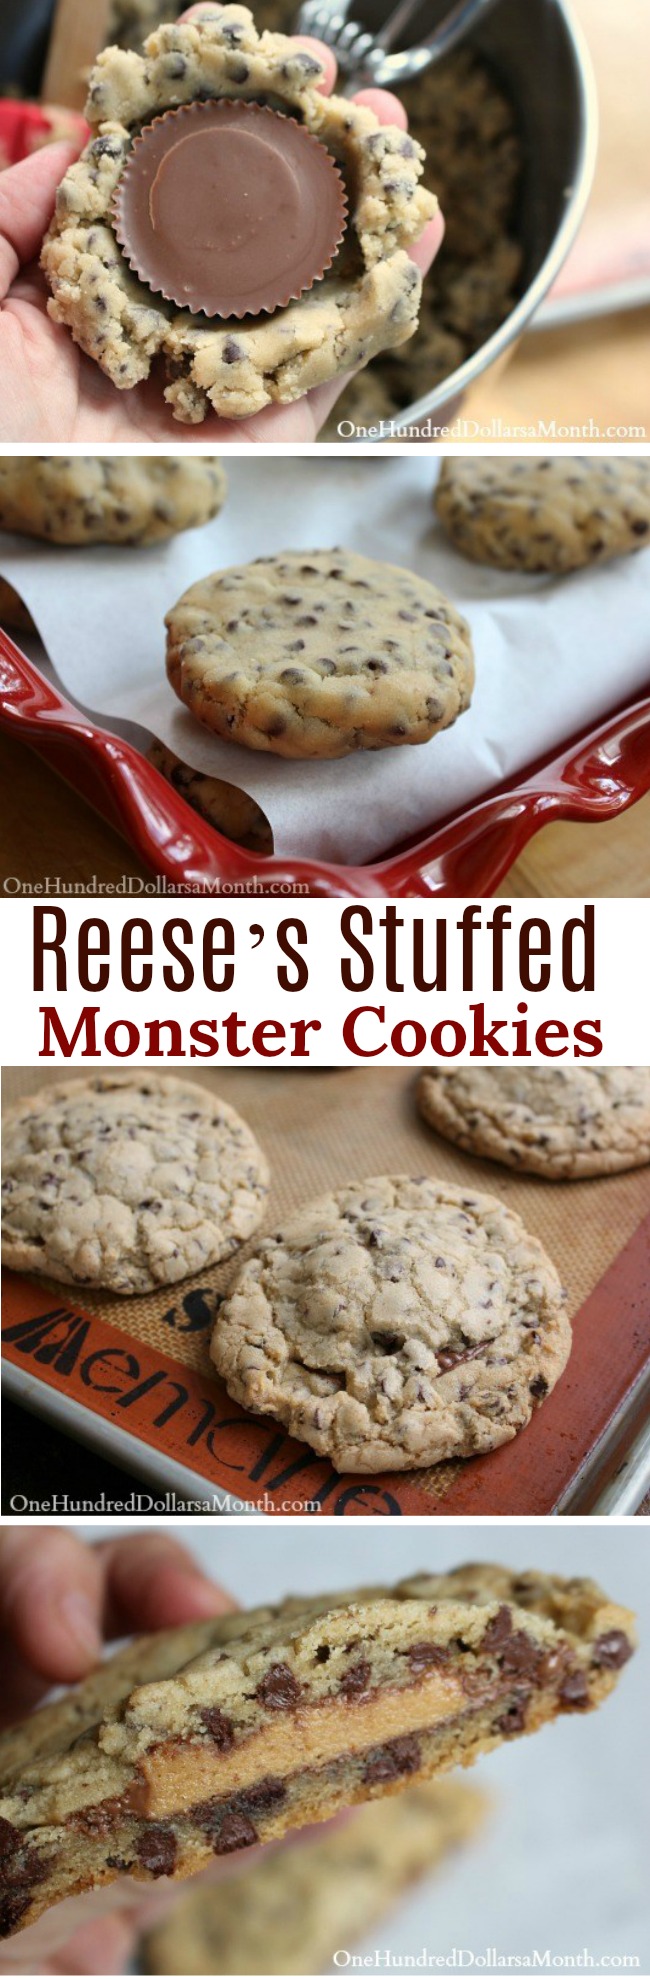 Chewy Reese’s Stuffed Monster Cookies